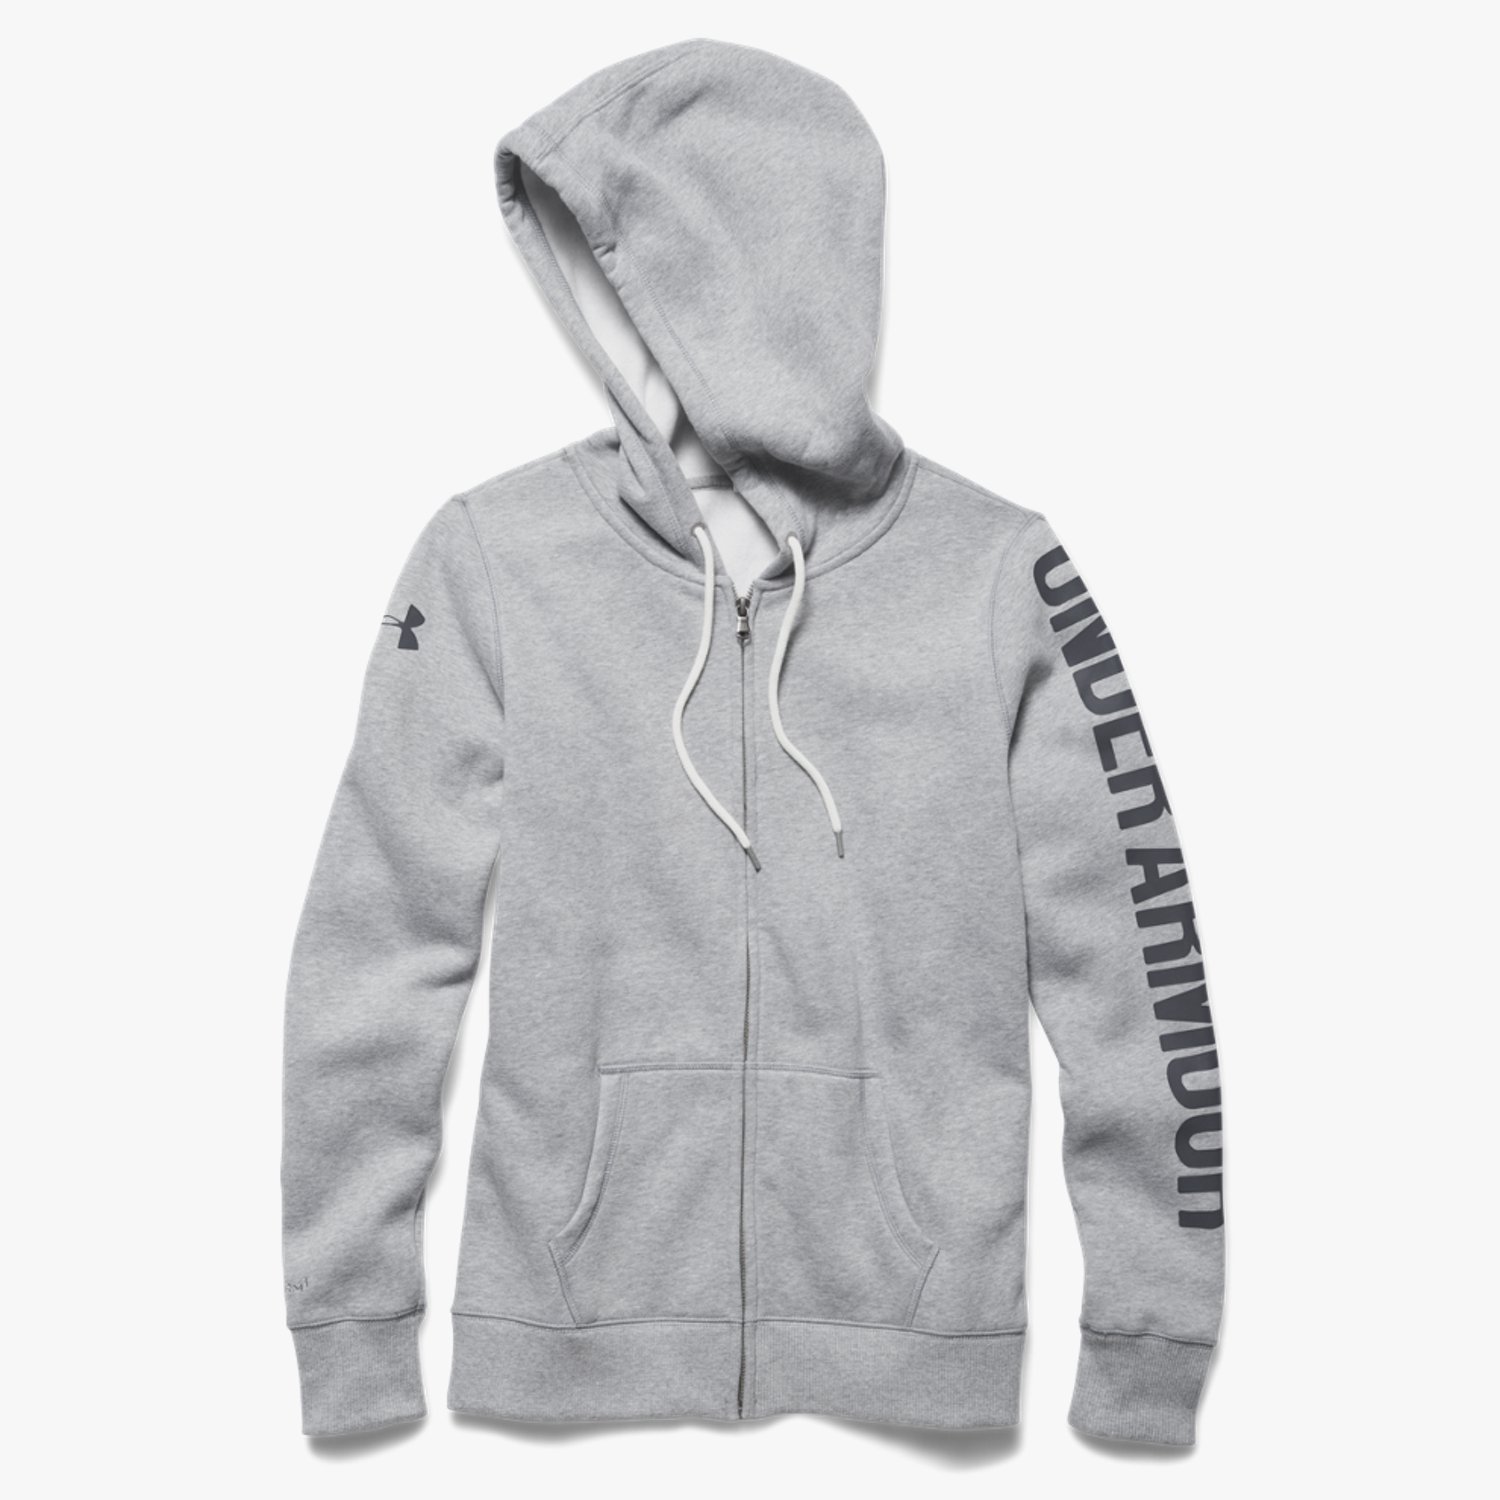  -  under armour Storm Rival Cotton Hoodie